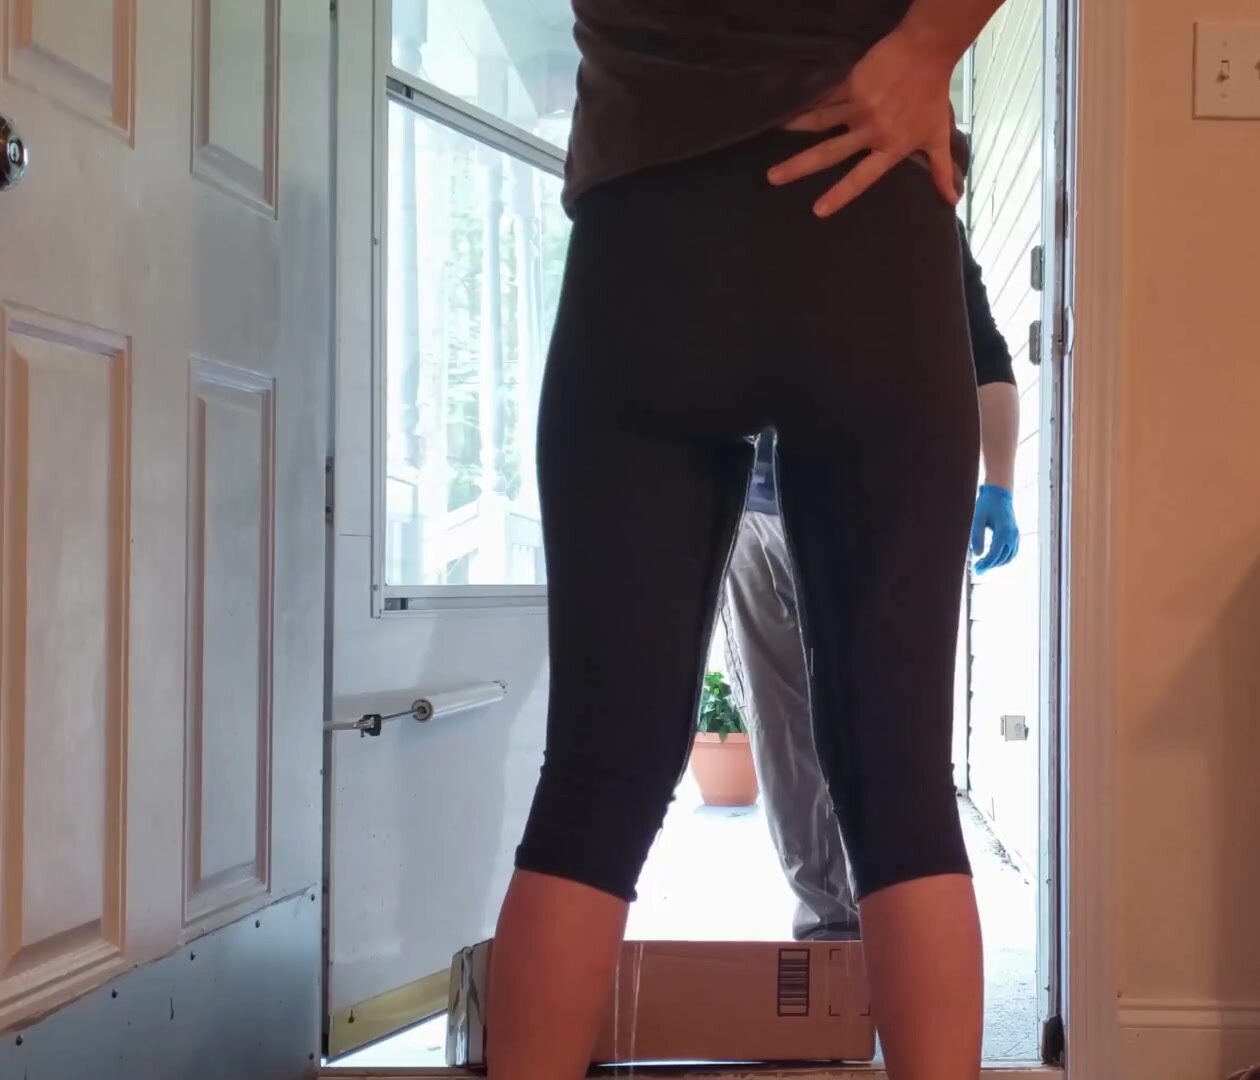 wife pissing in pants